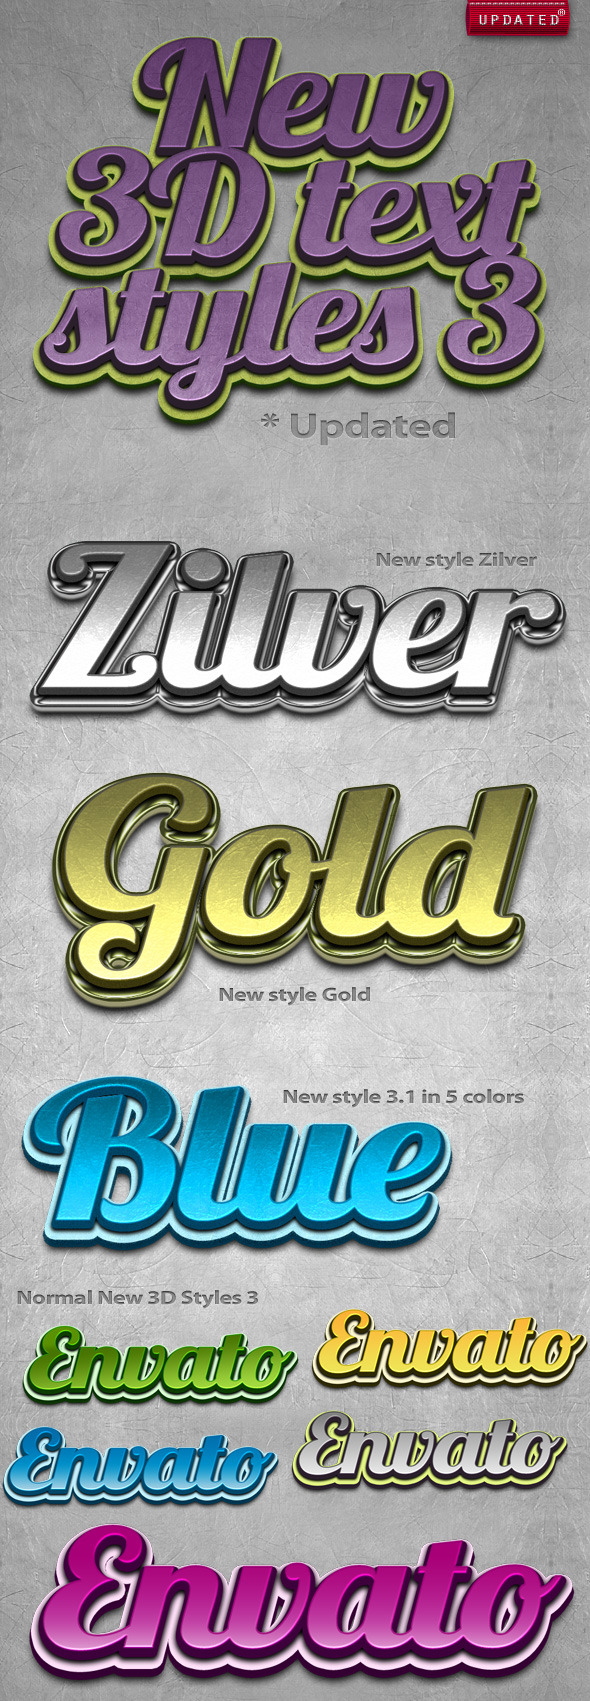 New 3D Text Styles #3 - Text Effects Styles